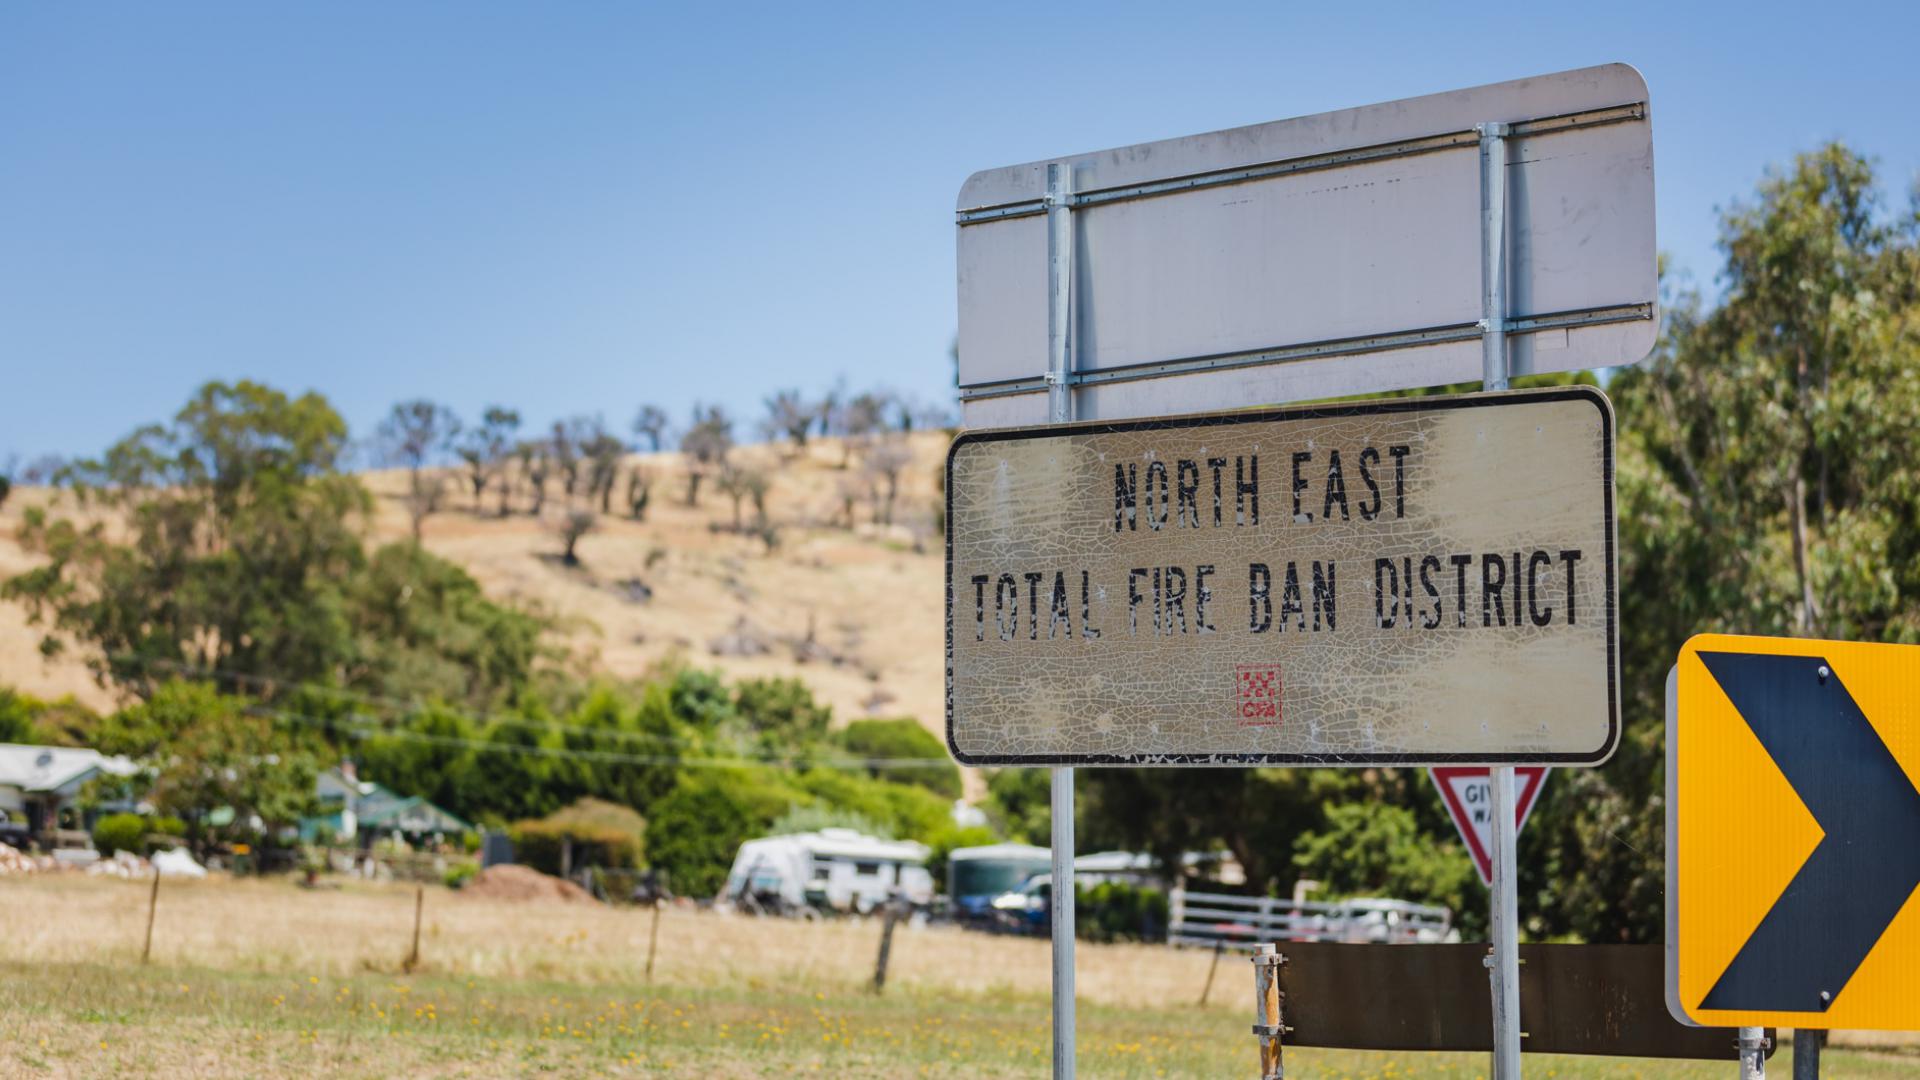 Image of a damaged road sign in Australia which has been previously burnt by a bushfire.